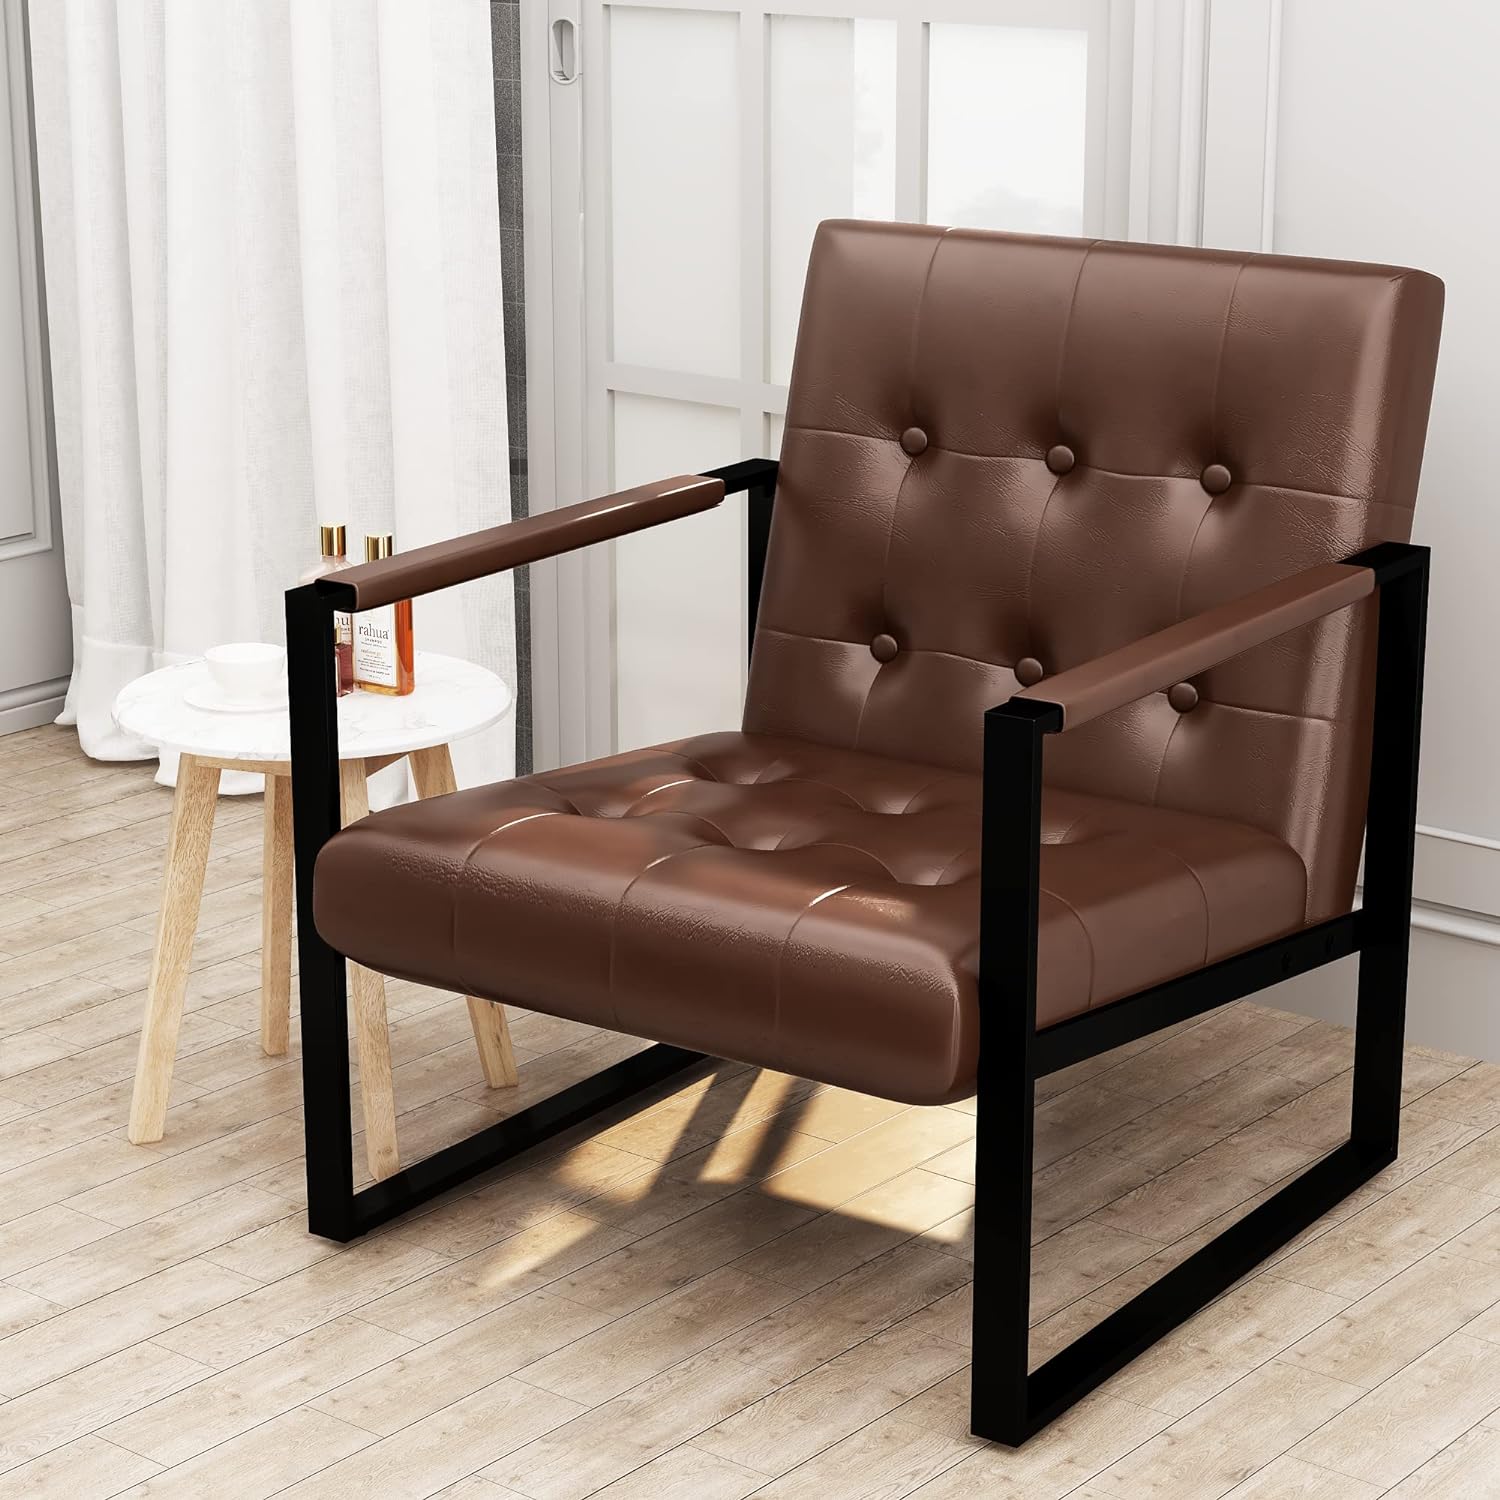 AWQM Tufted Faux Leather Accent Armchair